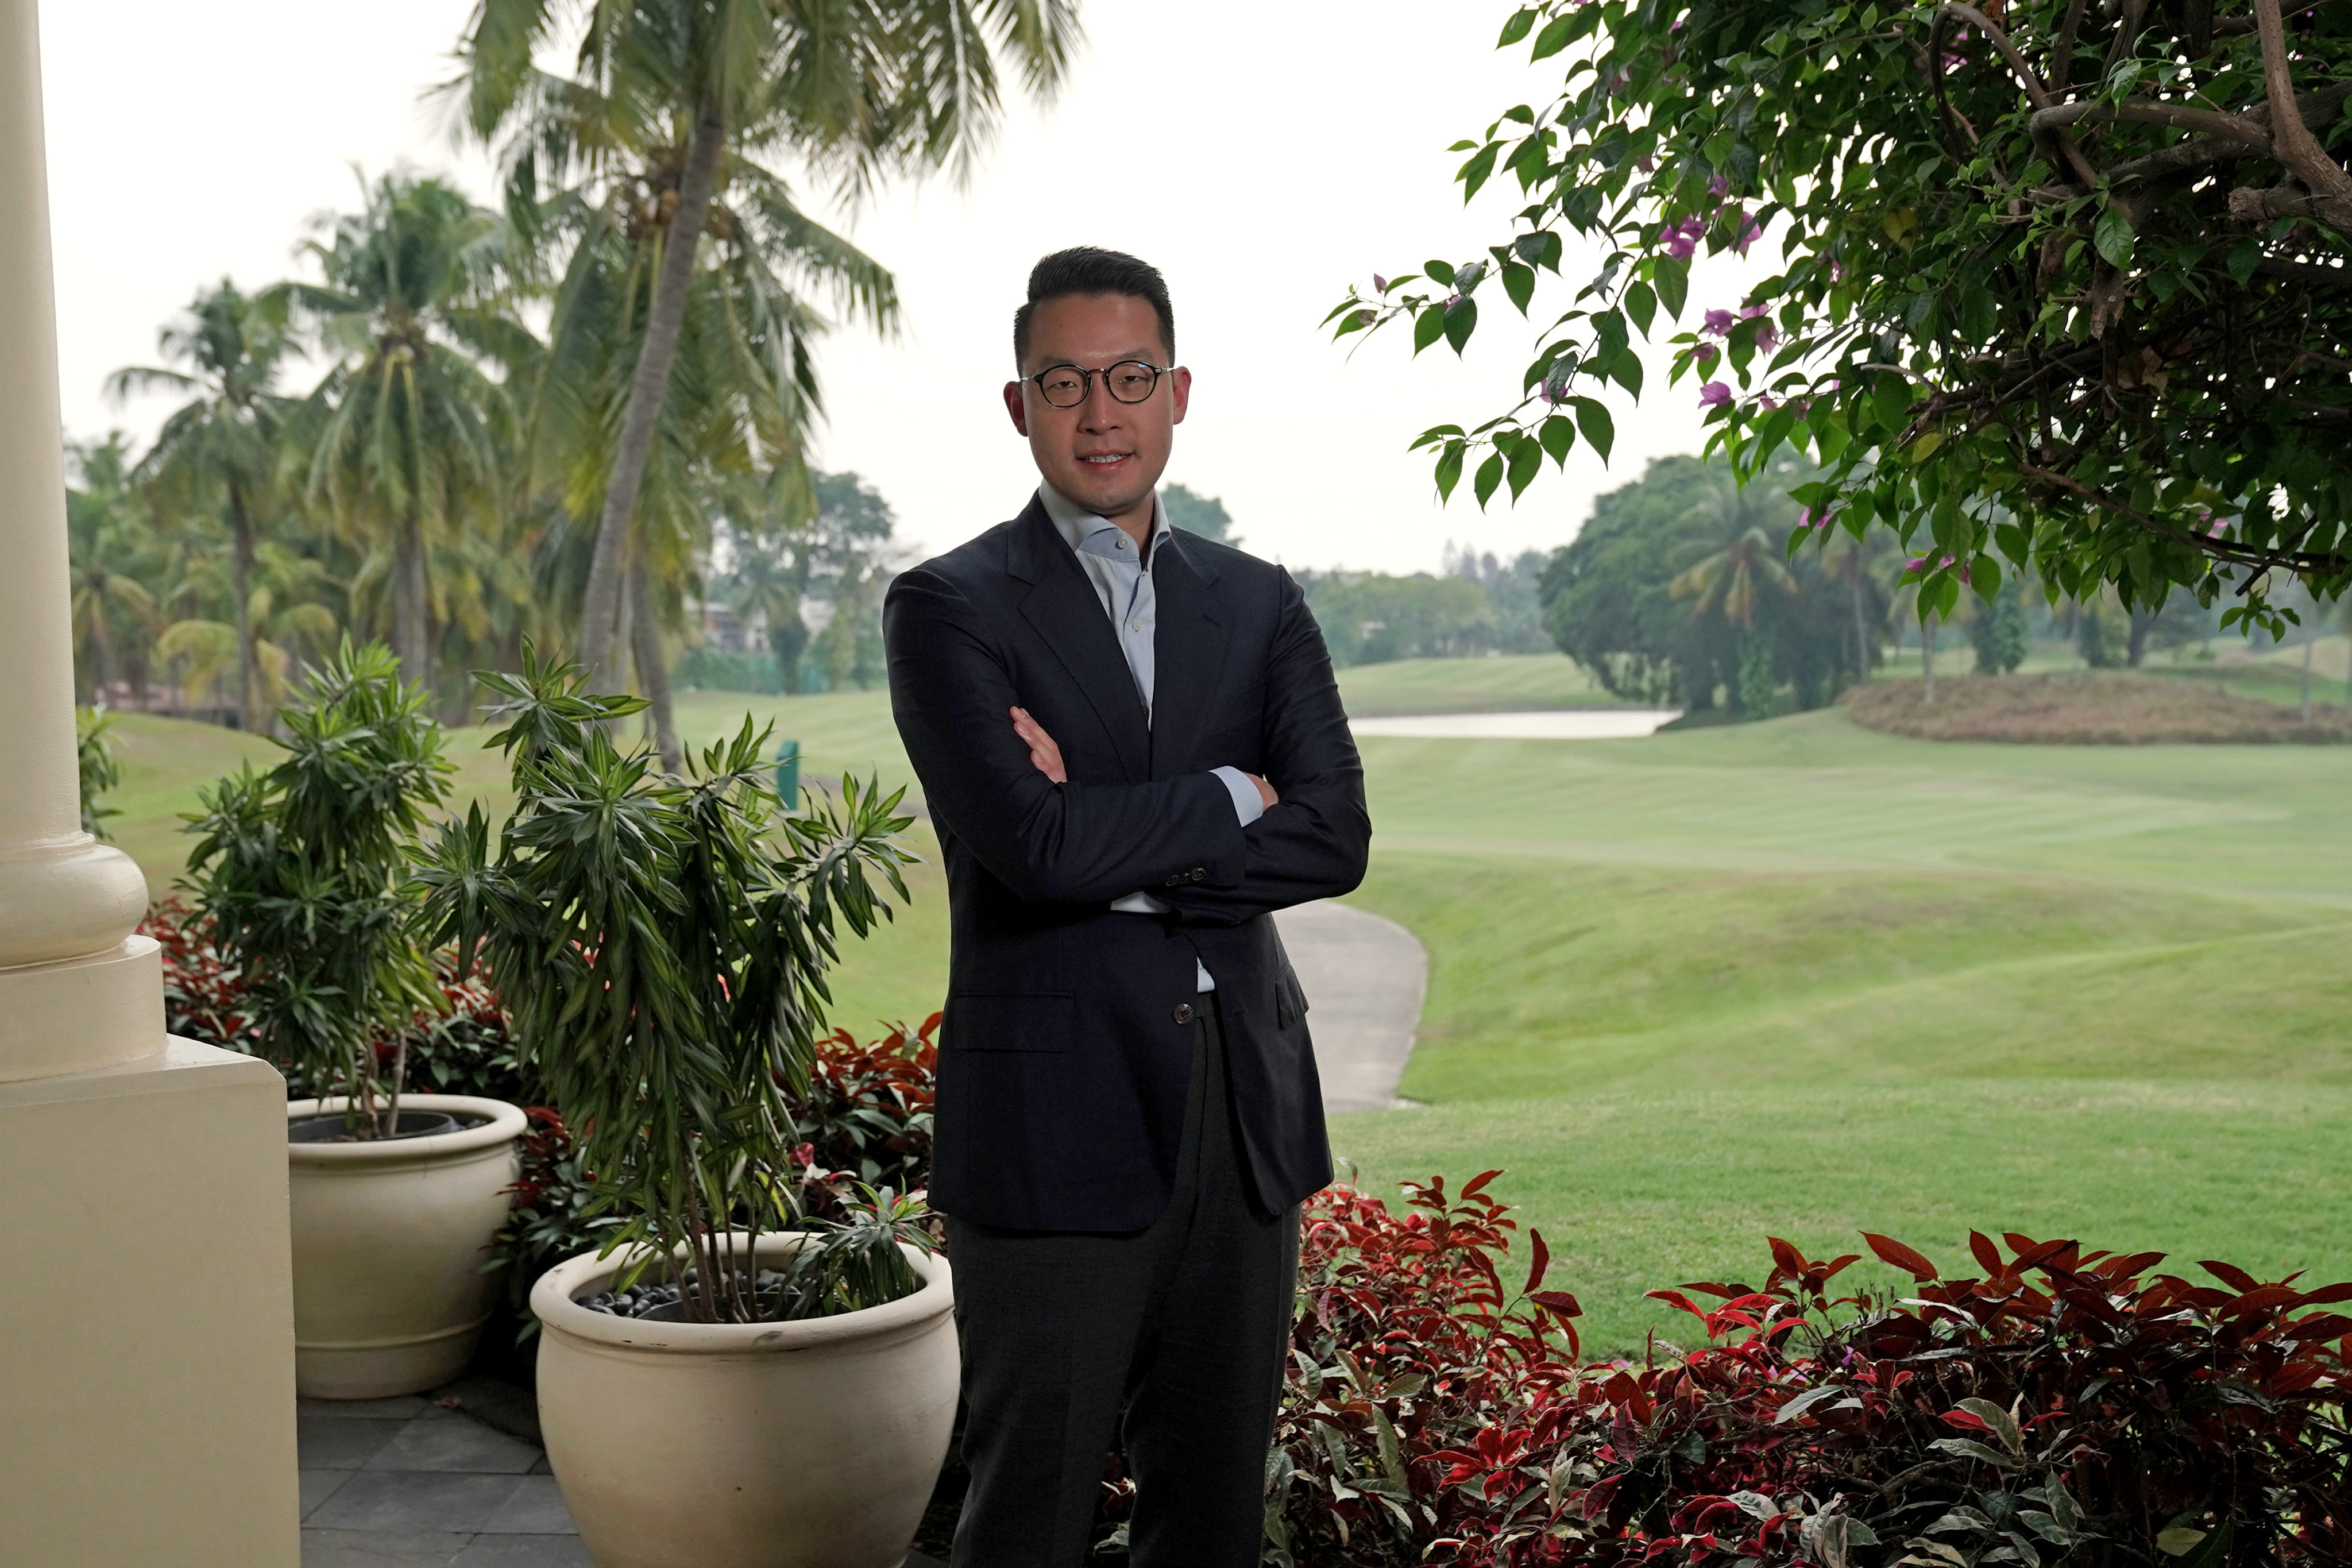 John Riady, Lippo Group CEO, pictured in Jakarta in 2019. Photo: Bloomberg